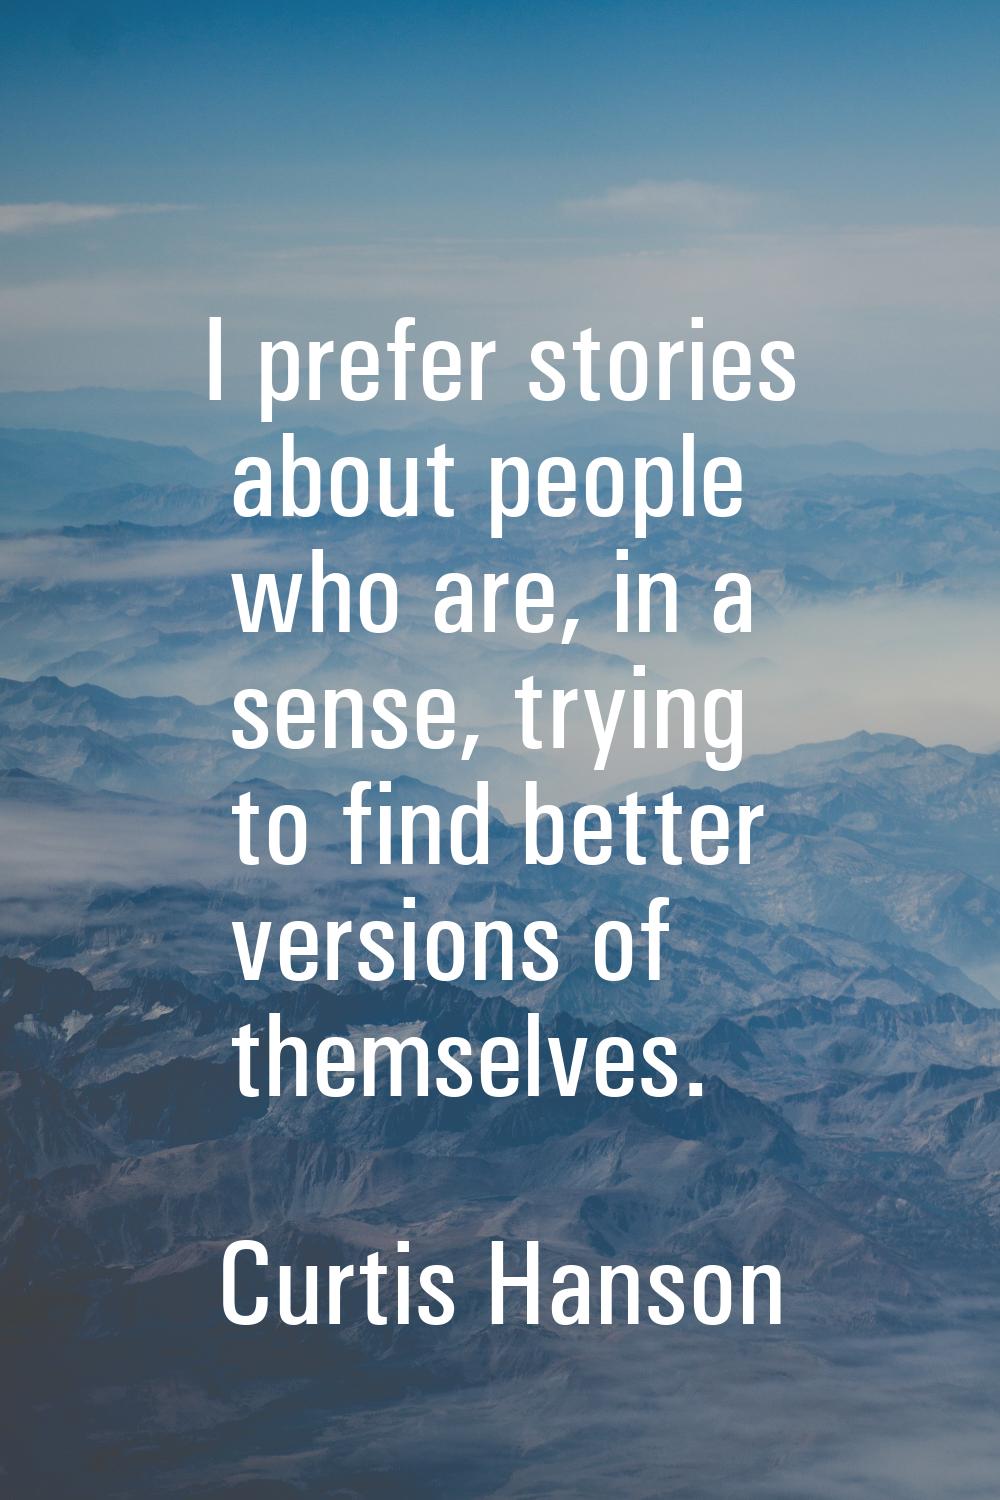 I prefer stories about people who are, in a sense, trying to find better versions of themselves.